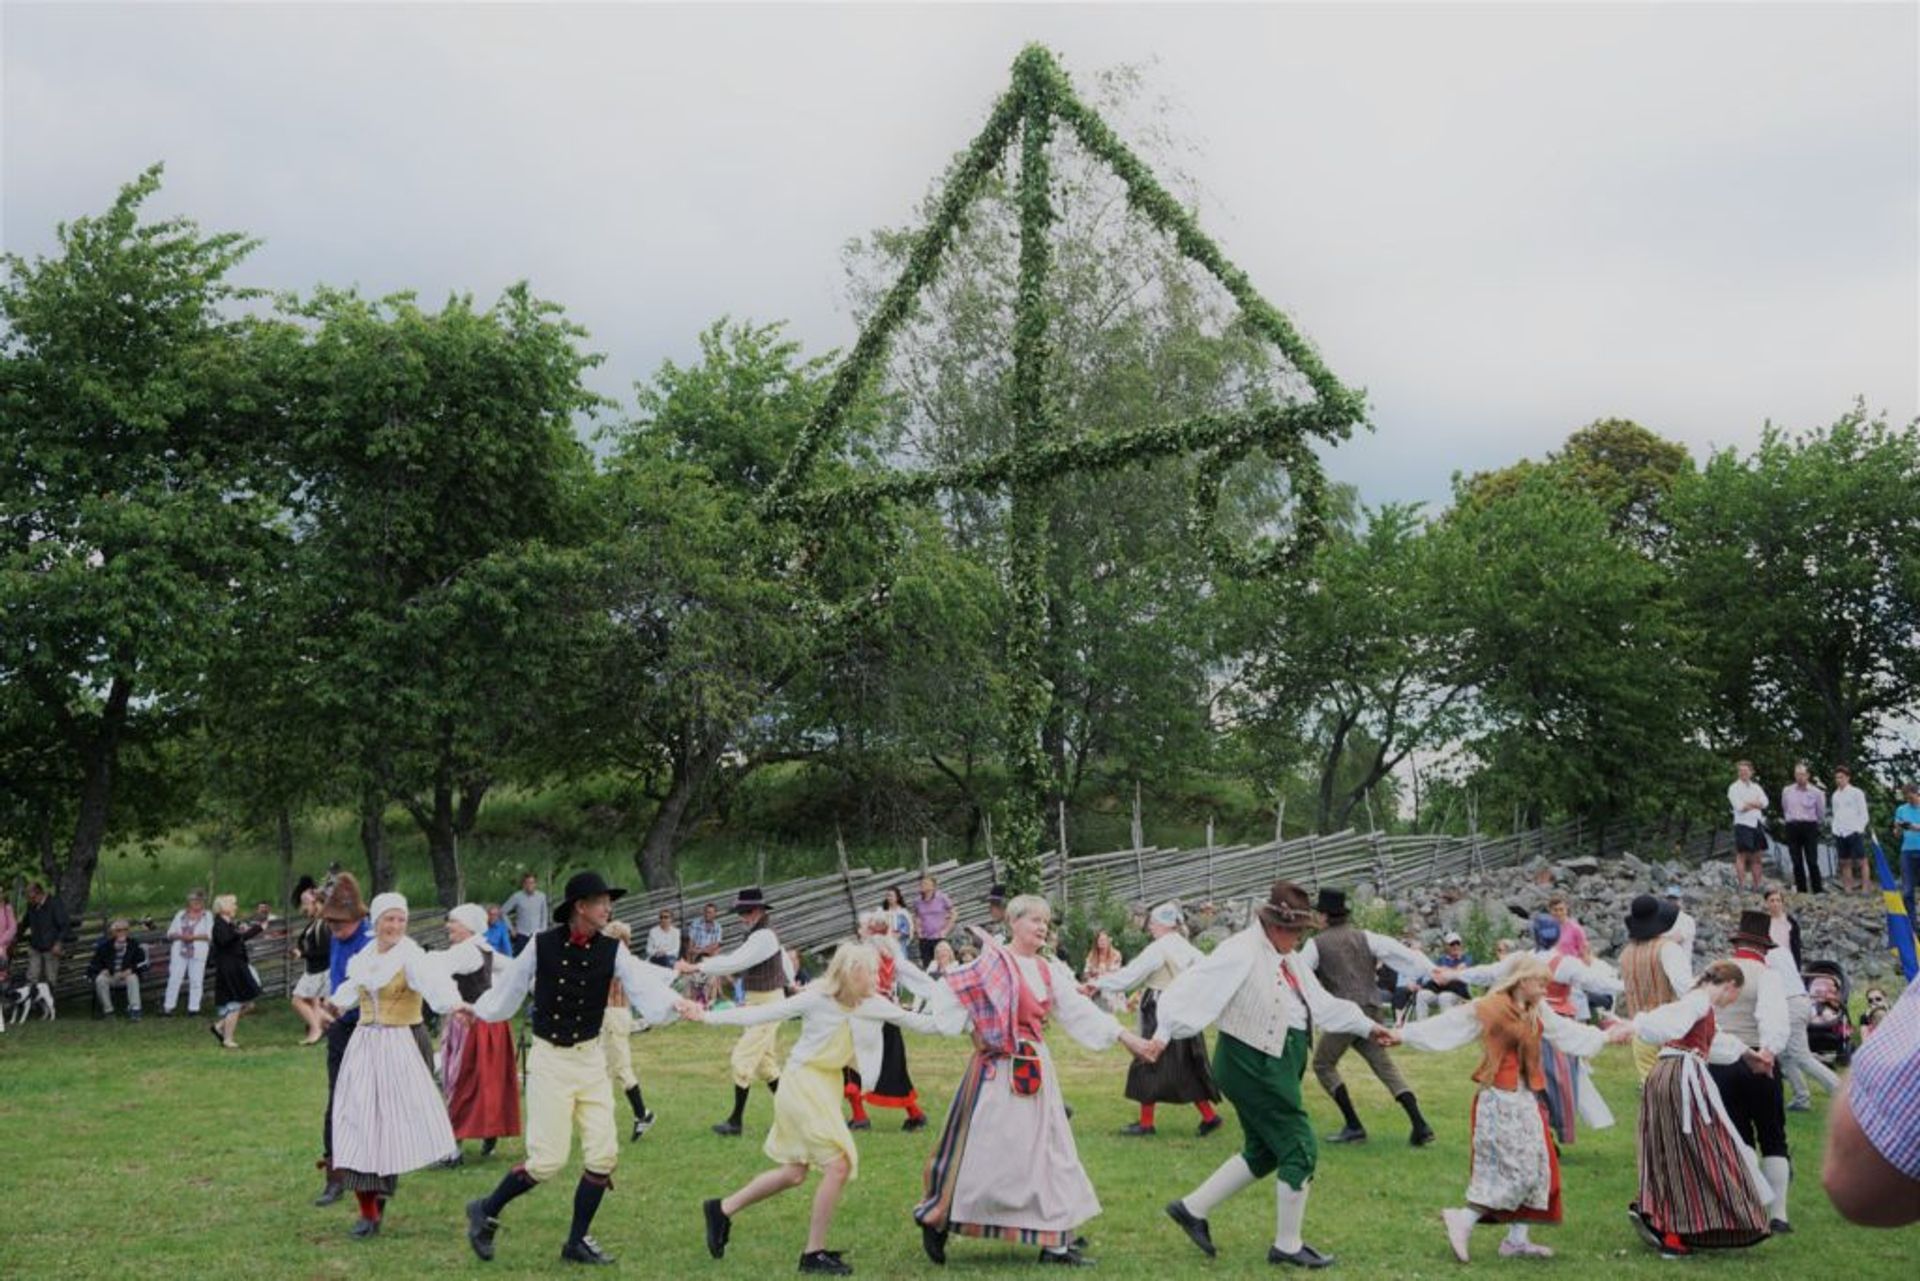 People dressed in traditional folk costumes dancing around a maypole.